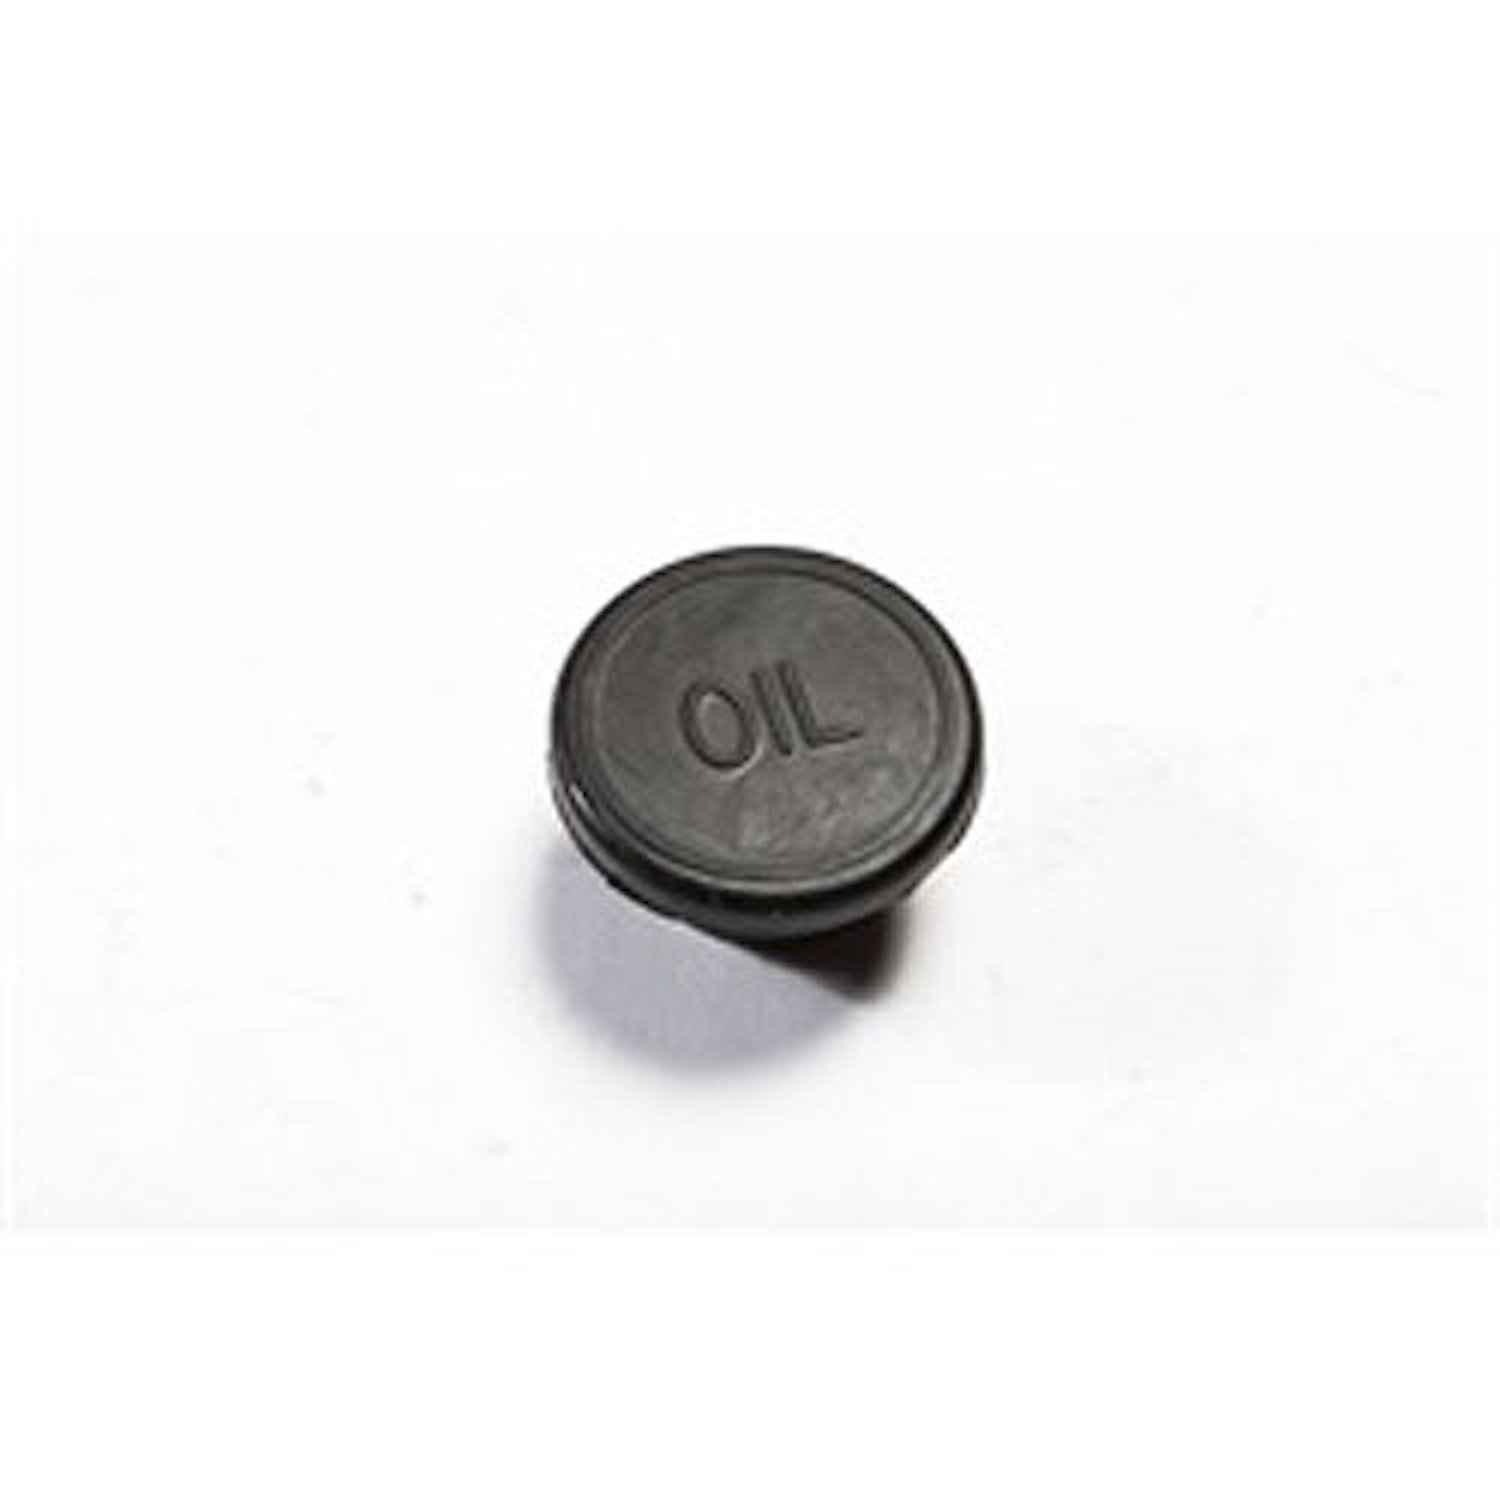 This rubber oil fill plug fits aftermarket aluminum valve covers. Fits the valve covers on 258 cubic inch engines.